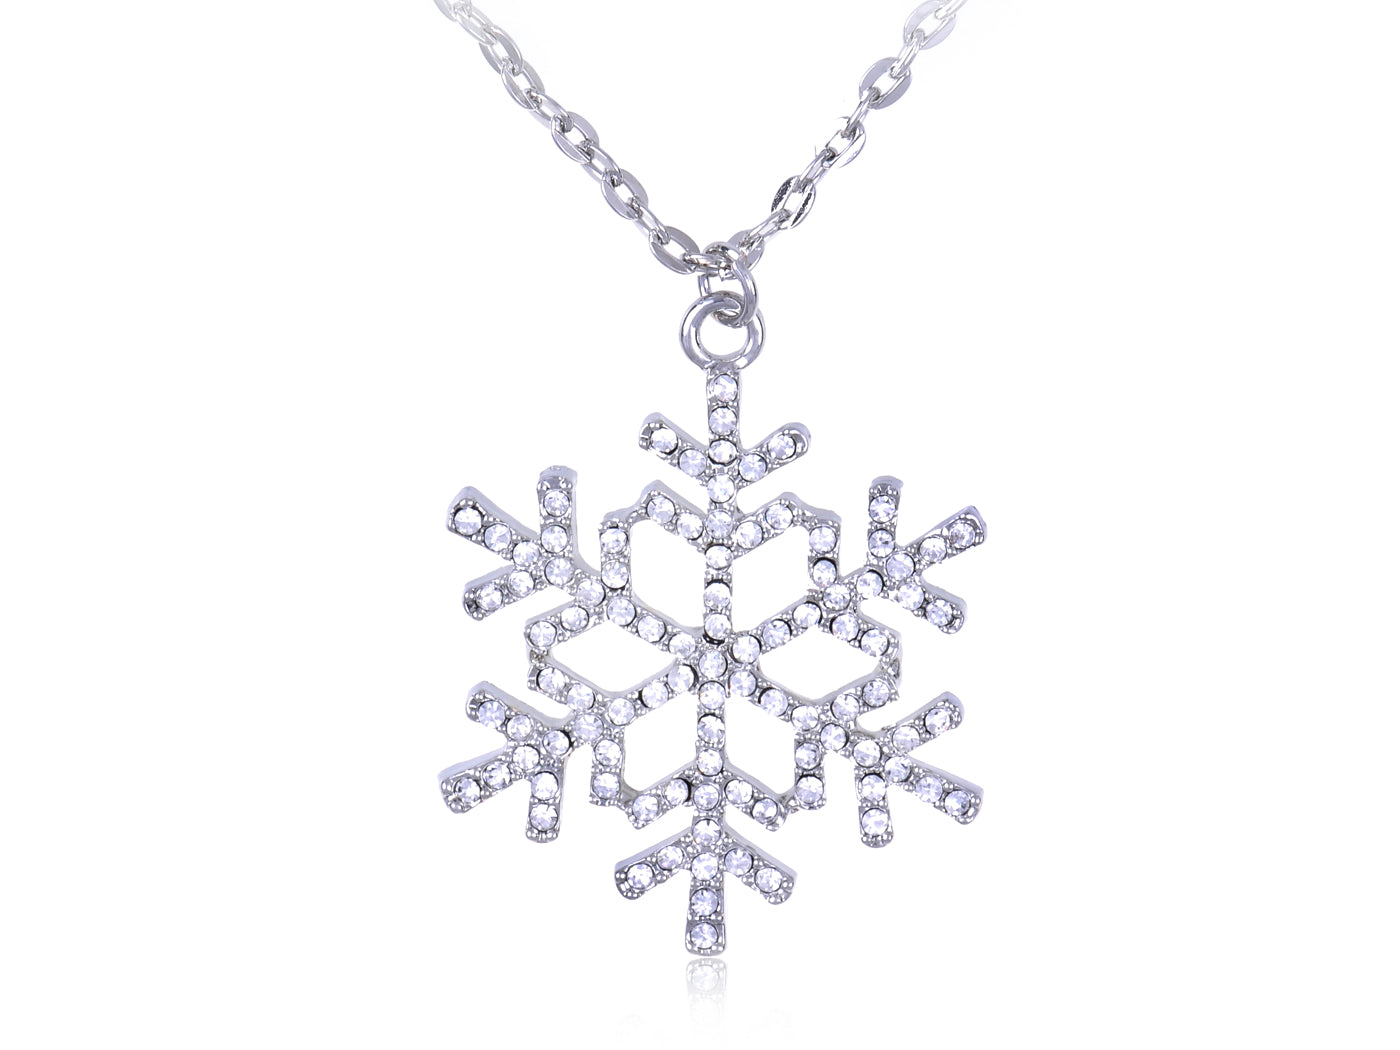 Tons Holiday Winter Snowflake Pendant Necklace